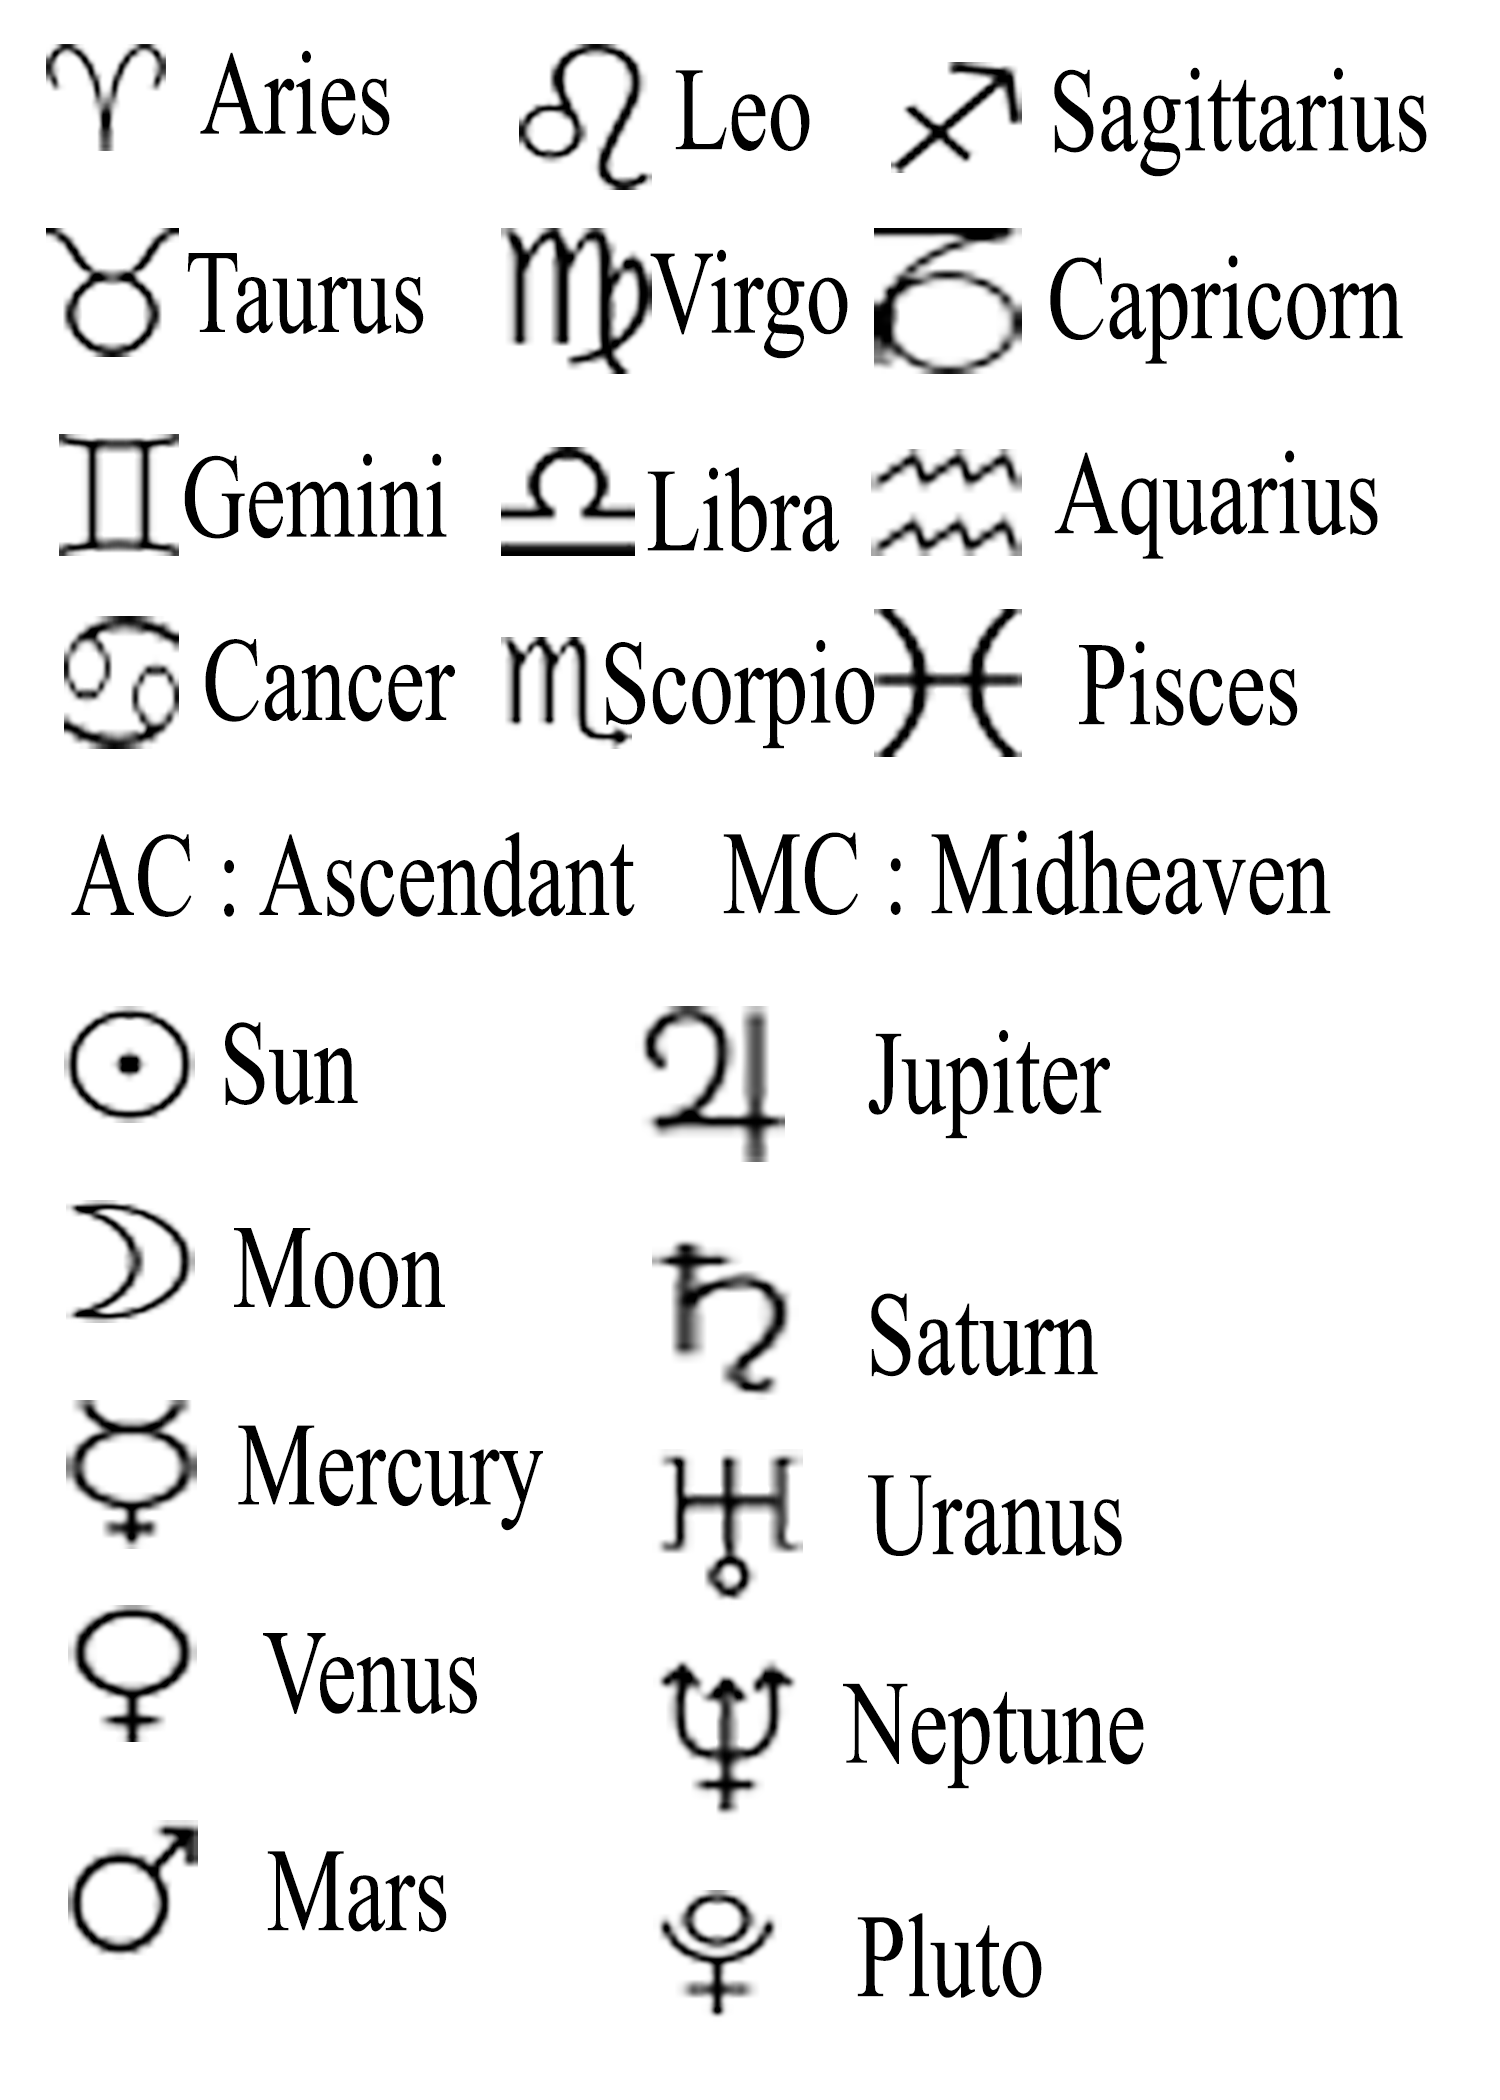 How To Read A Birth Chart